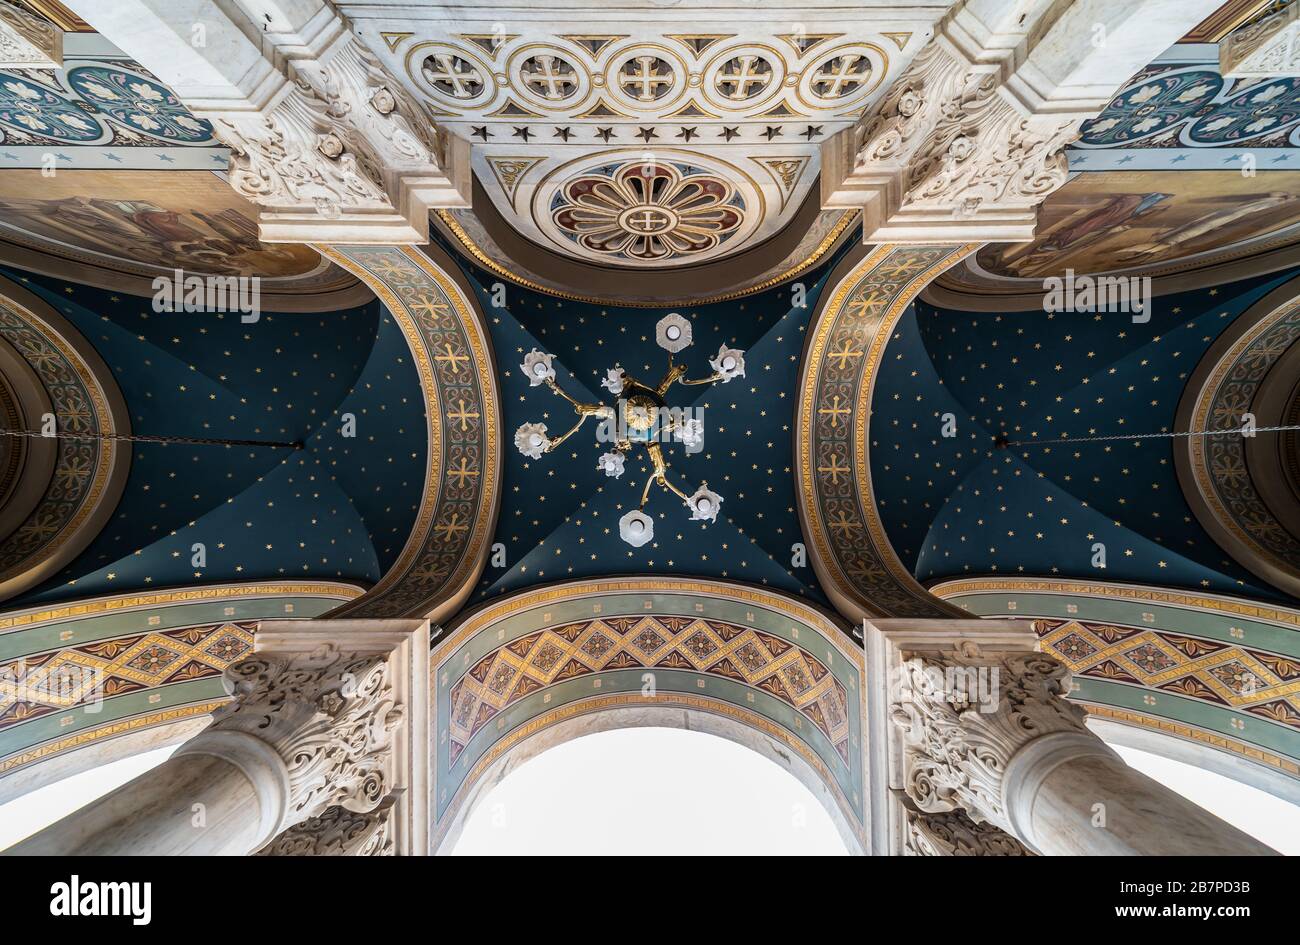 Athens Old Town, Attica/ Greece - 12 28 2019: Decorated ceiling and pillars of the entrance of the Metropolitan Cathedral of Athens Stock Photo